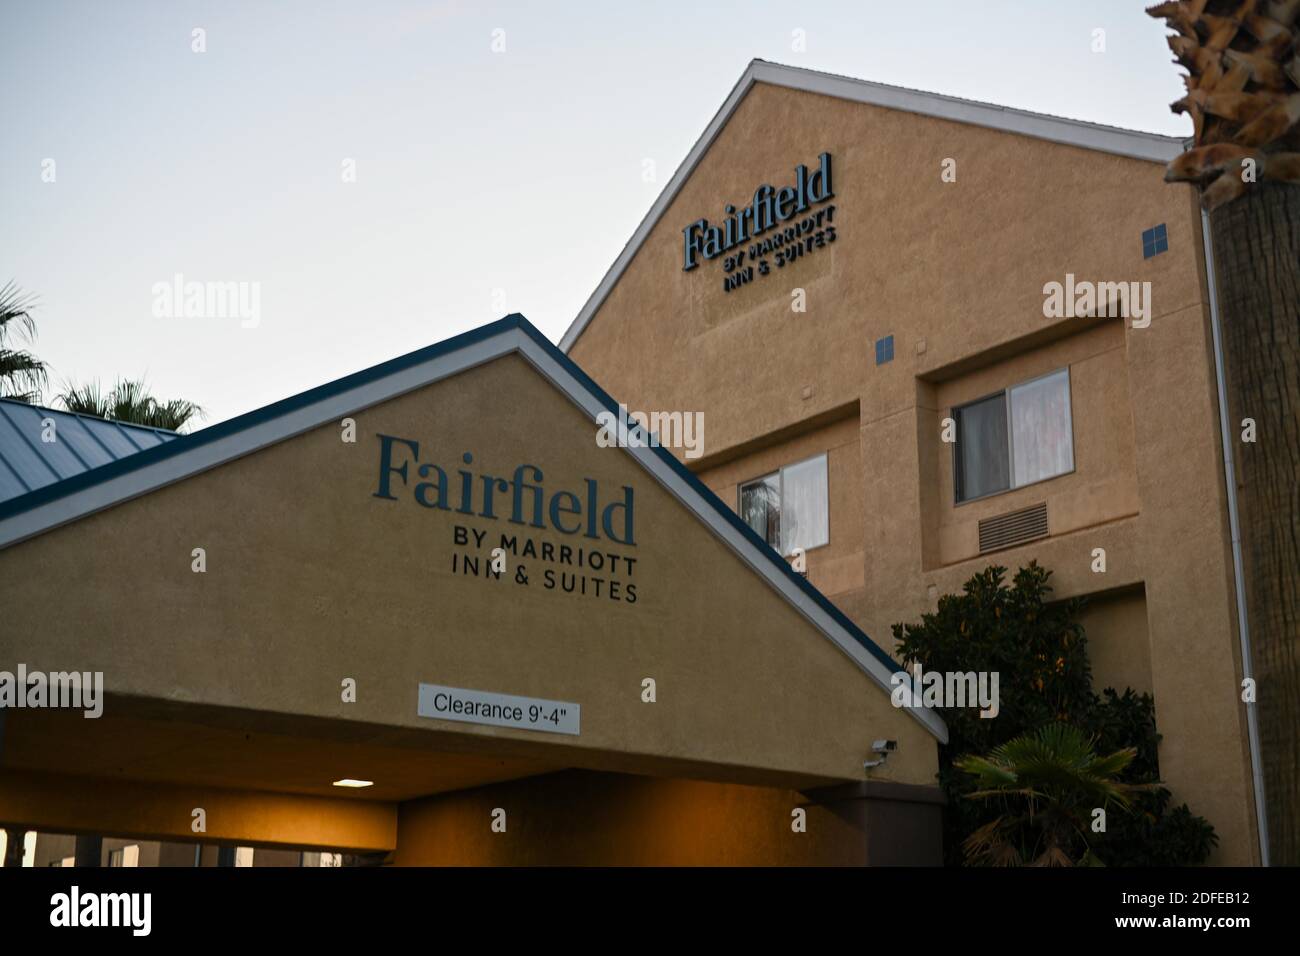 General overall view of Fairfield by Marriott Inn & Suites, Tuesday, Nov. 10, 2020, St. George, Utah. (Dylan Stewart/Image of Sport) Stock Photo